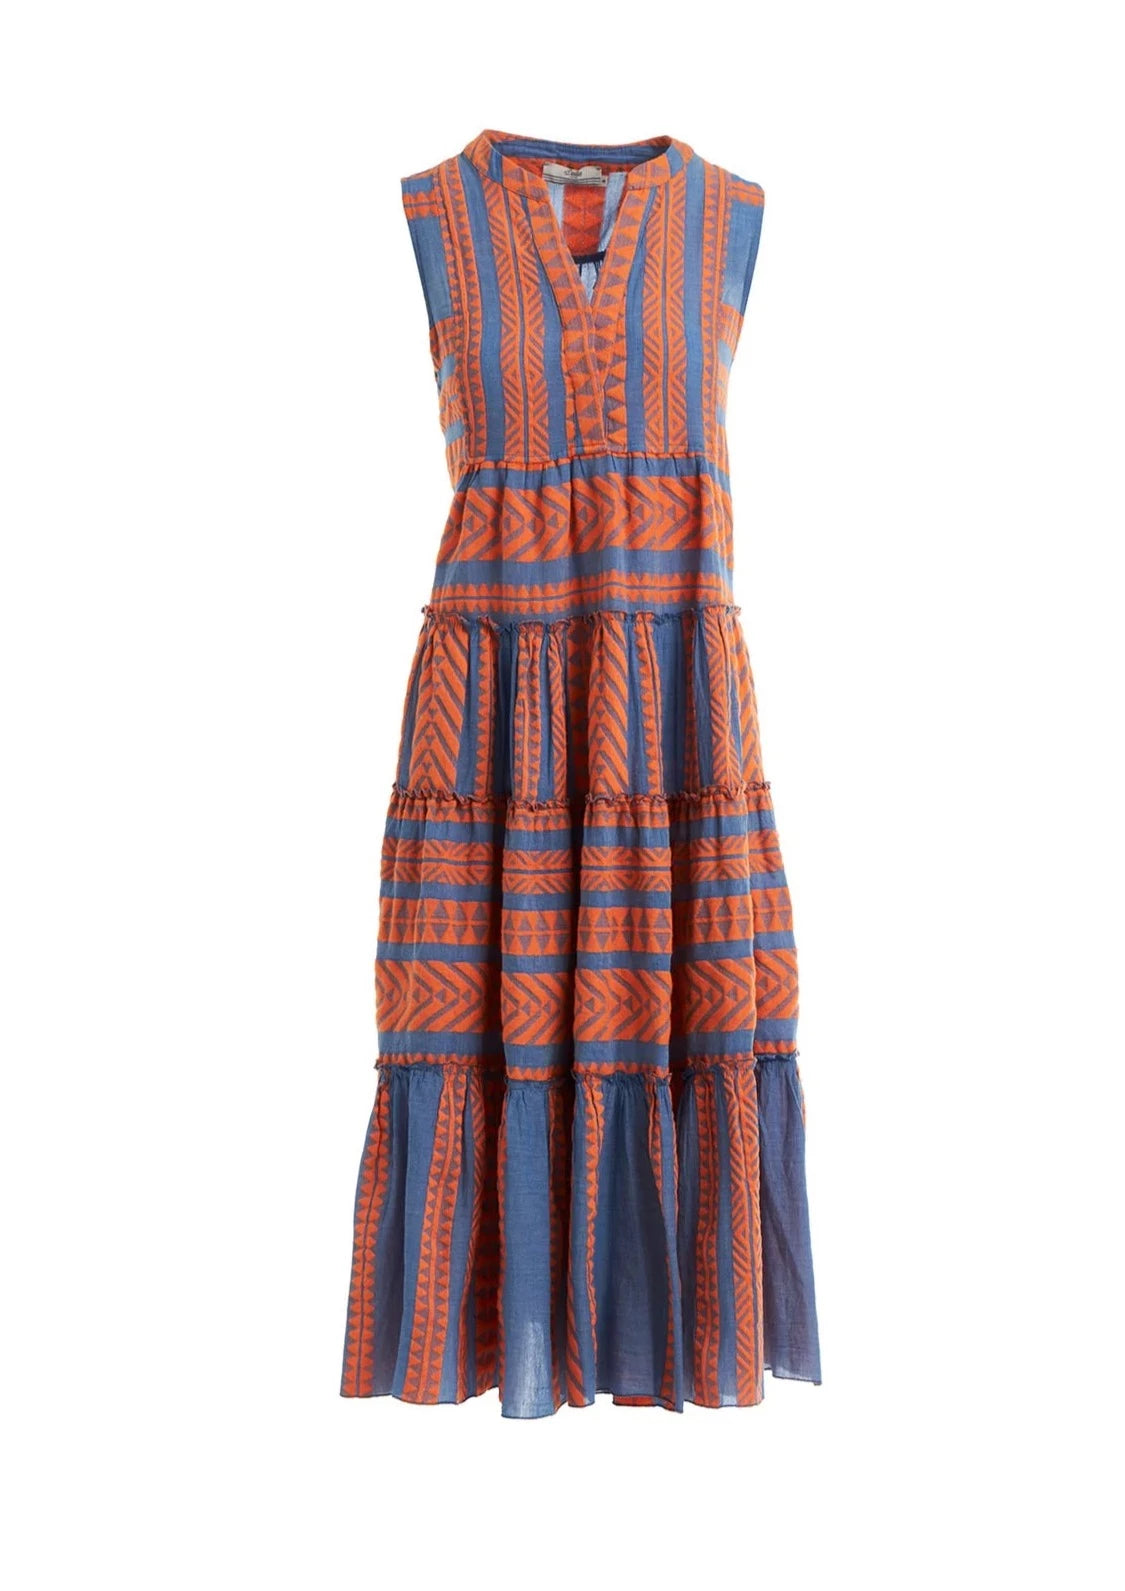 Devotion Tanzanitis Dress - Orange/Blue Luxury, femininity, and comfort are synonymous throughout the entire Devotion Twins collection, making every summer outfit effortlessly chic. The brand has become famous mainly thanks to the Ella Tunic Dress design, and the Tanzinitis is the sleeveless version of this dress. You can easily slip on any piece to wear as a cover-up at the beach or pool, to go shopping, or linger for a sunset drink and dinner.